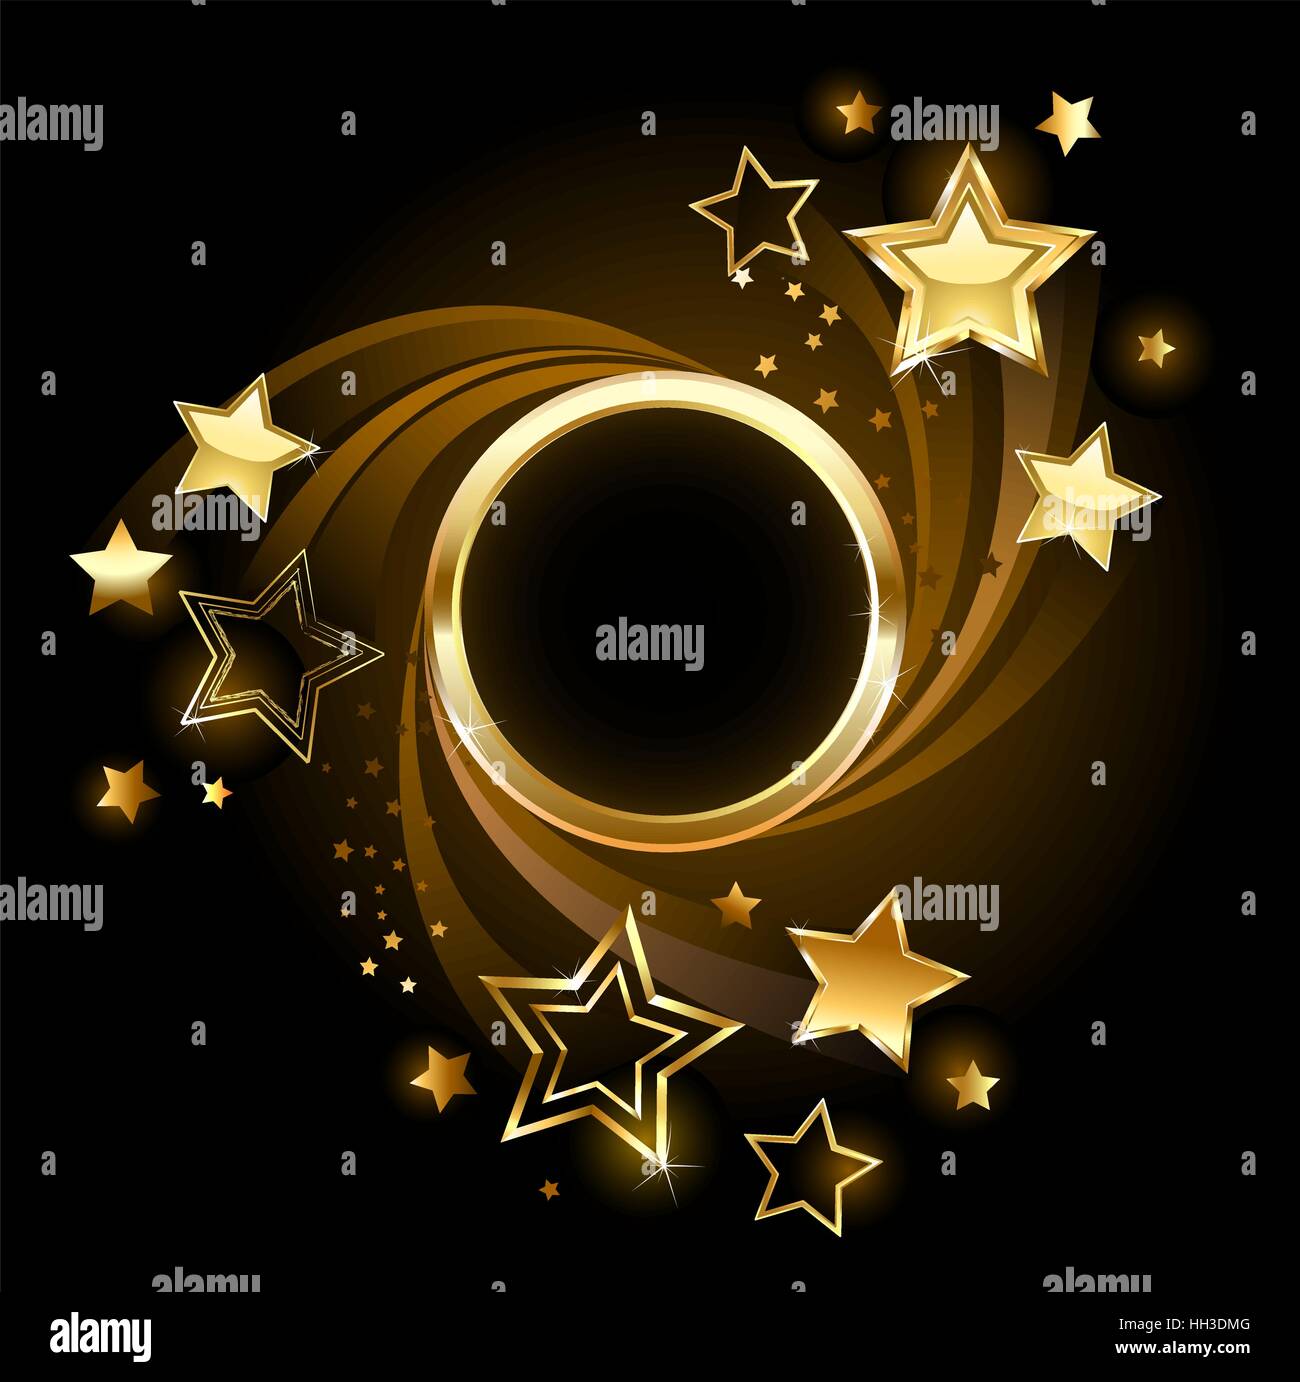 Round golden banner with gold, shining stars on a black background. Stock Vector